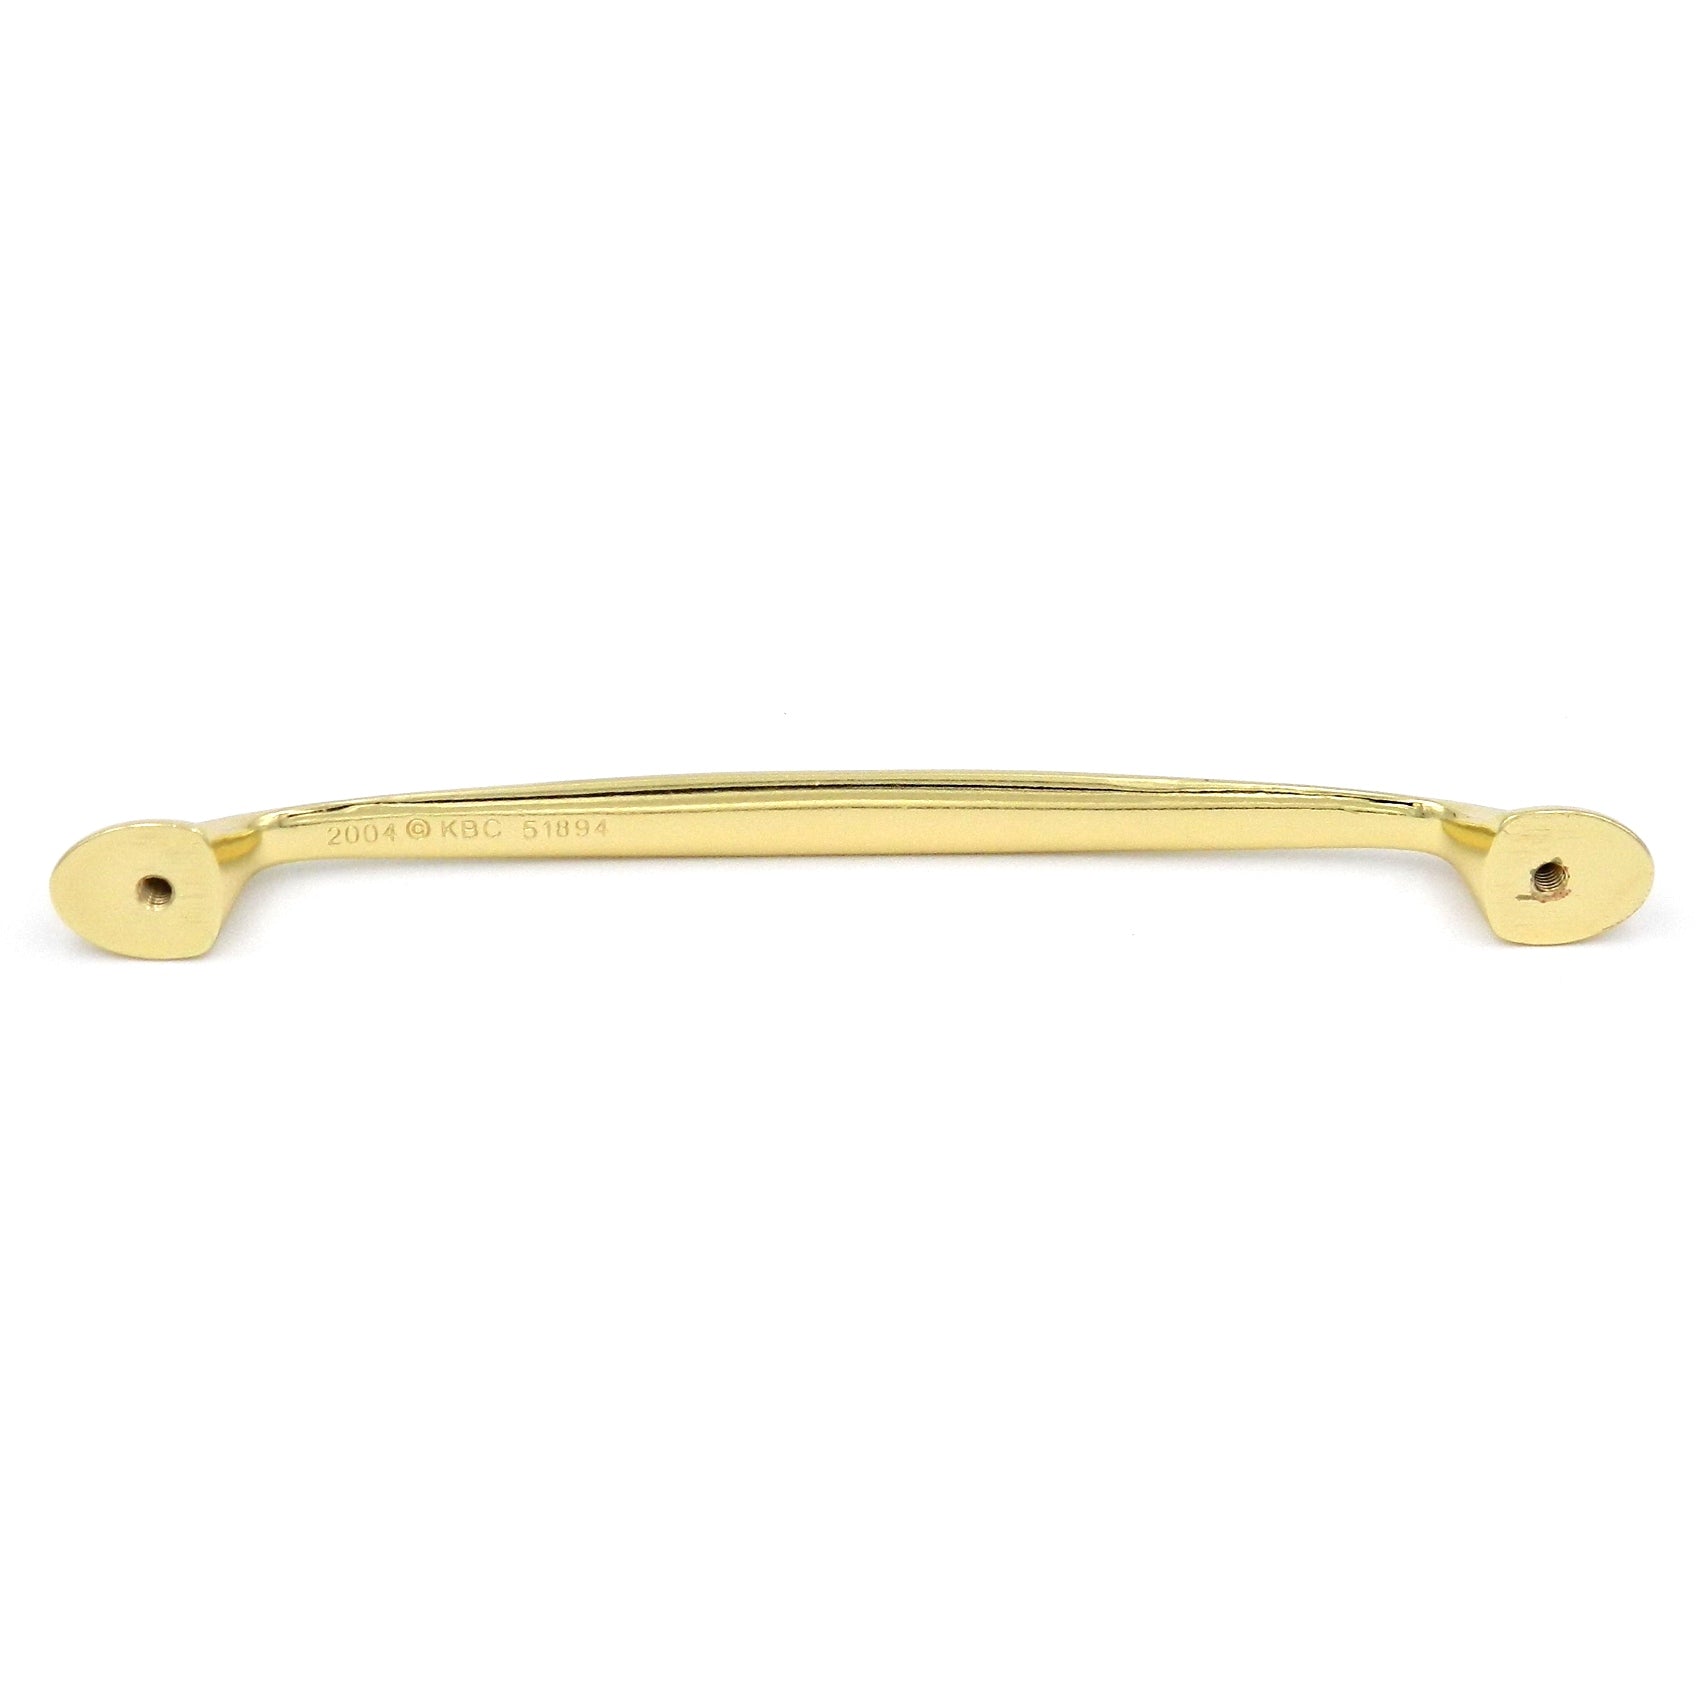 10 Pack Hickory Altair P3080-PB Polished Brass 6 1/4" (160mm)cc Arch Cabinet Handle Pull